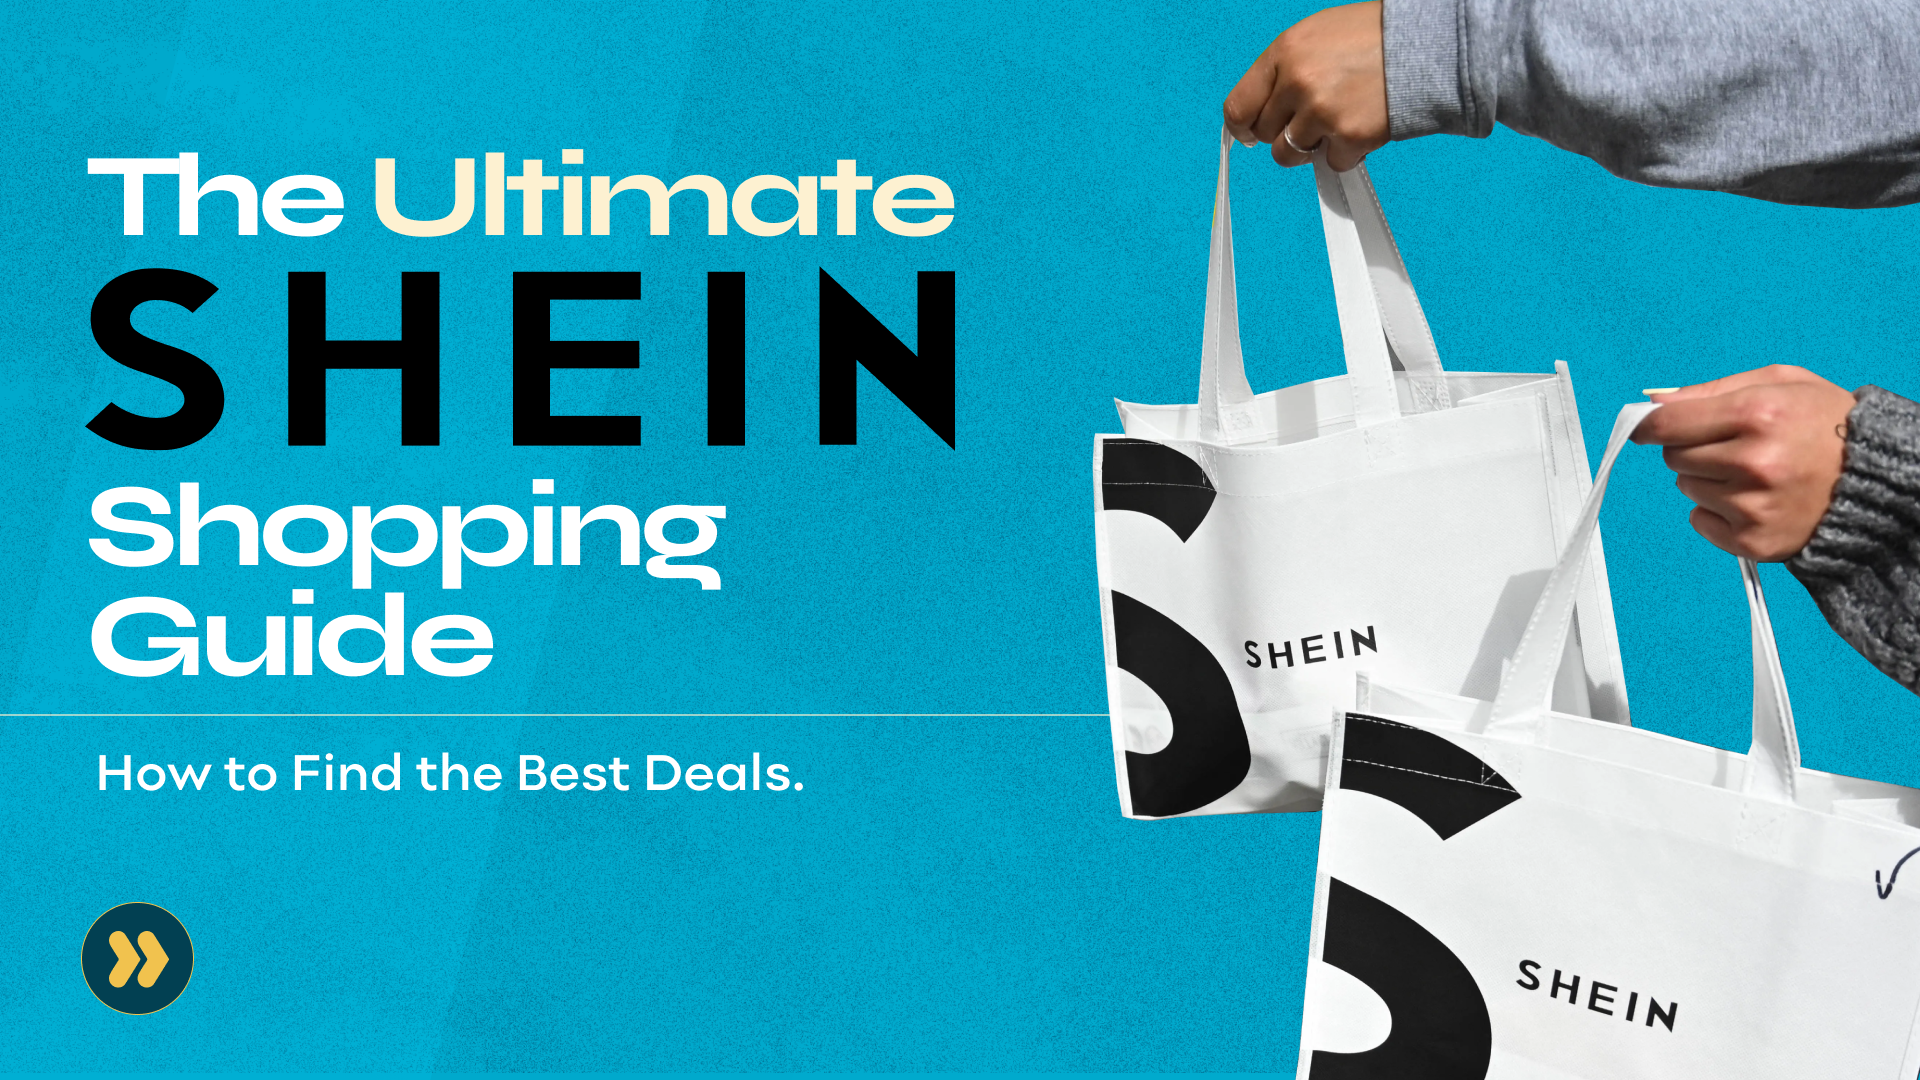 The Ultimate SHEIN Shopping Guide: How to Find the Best Deals